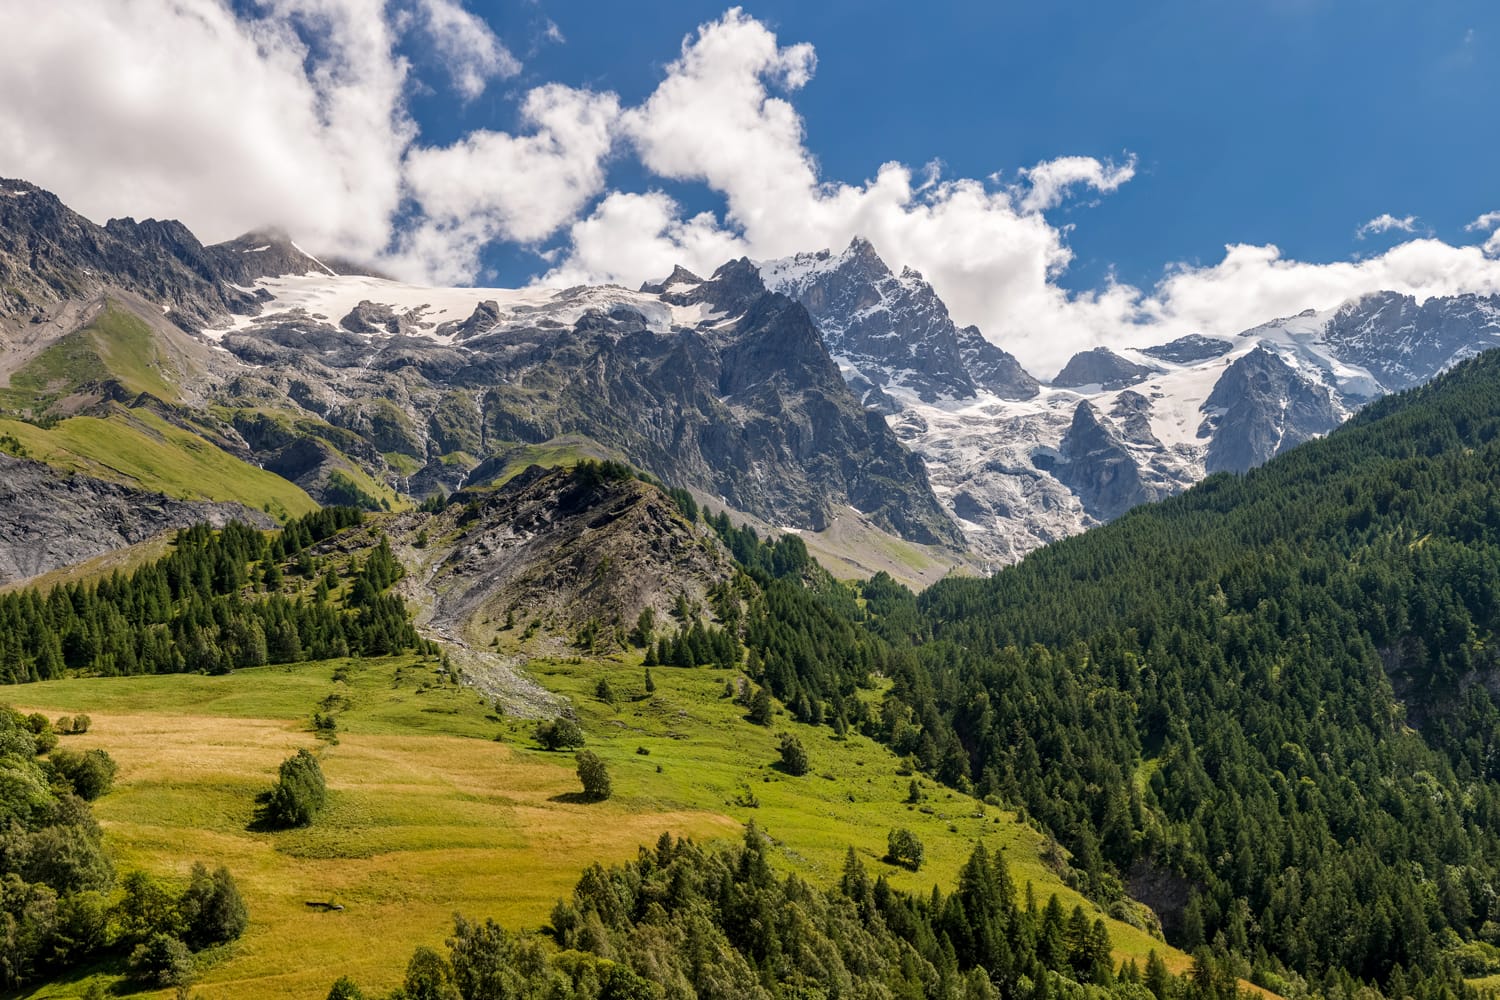 Summer view of the mountains and glaciers of the Ecrins National Park (La Meije and Glacier du Tabuchet) from the village of La Grave. Hautes-Alpes, PACA Region, Southern French Alps, France